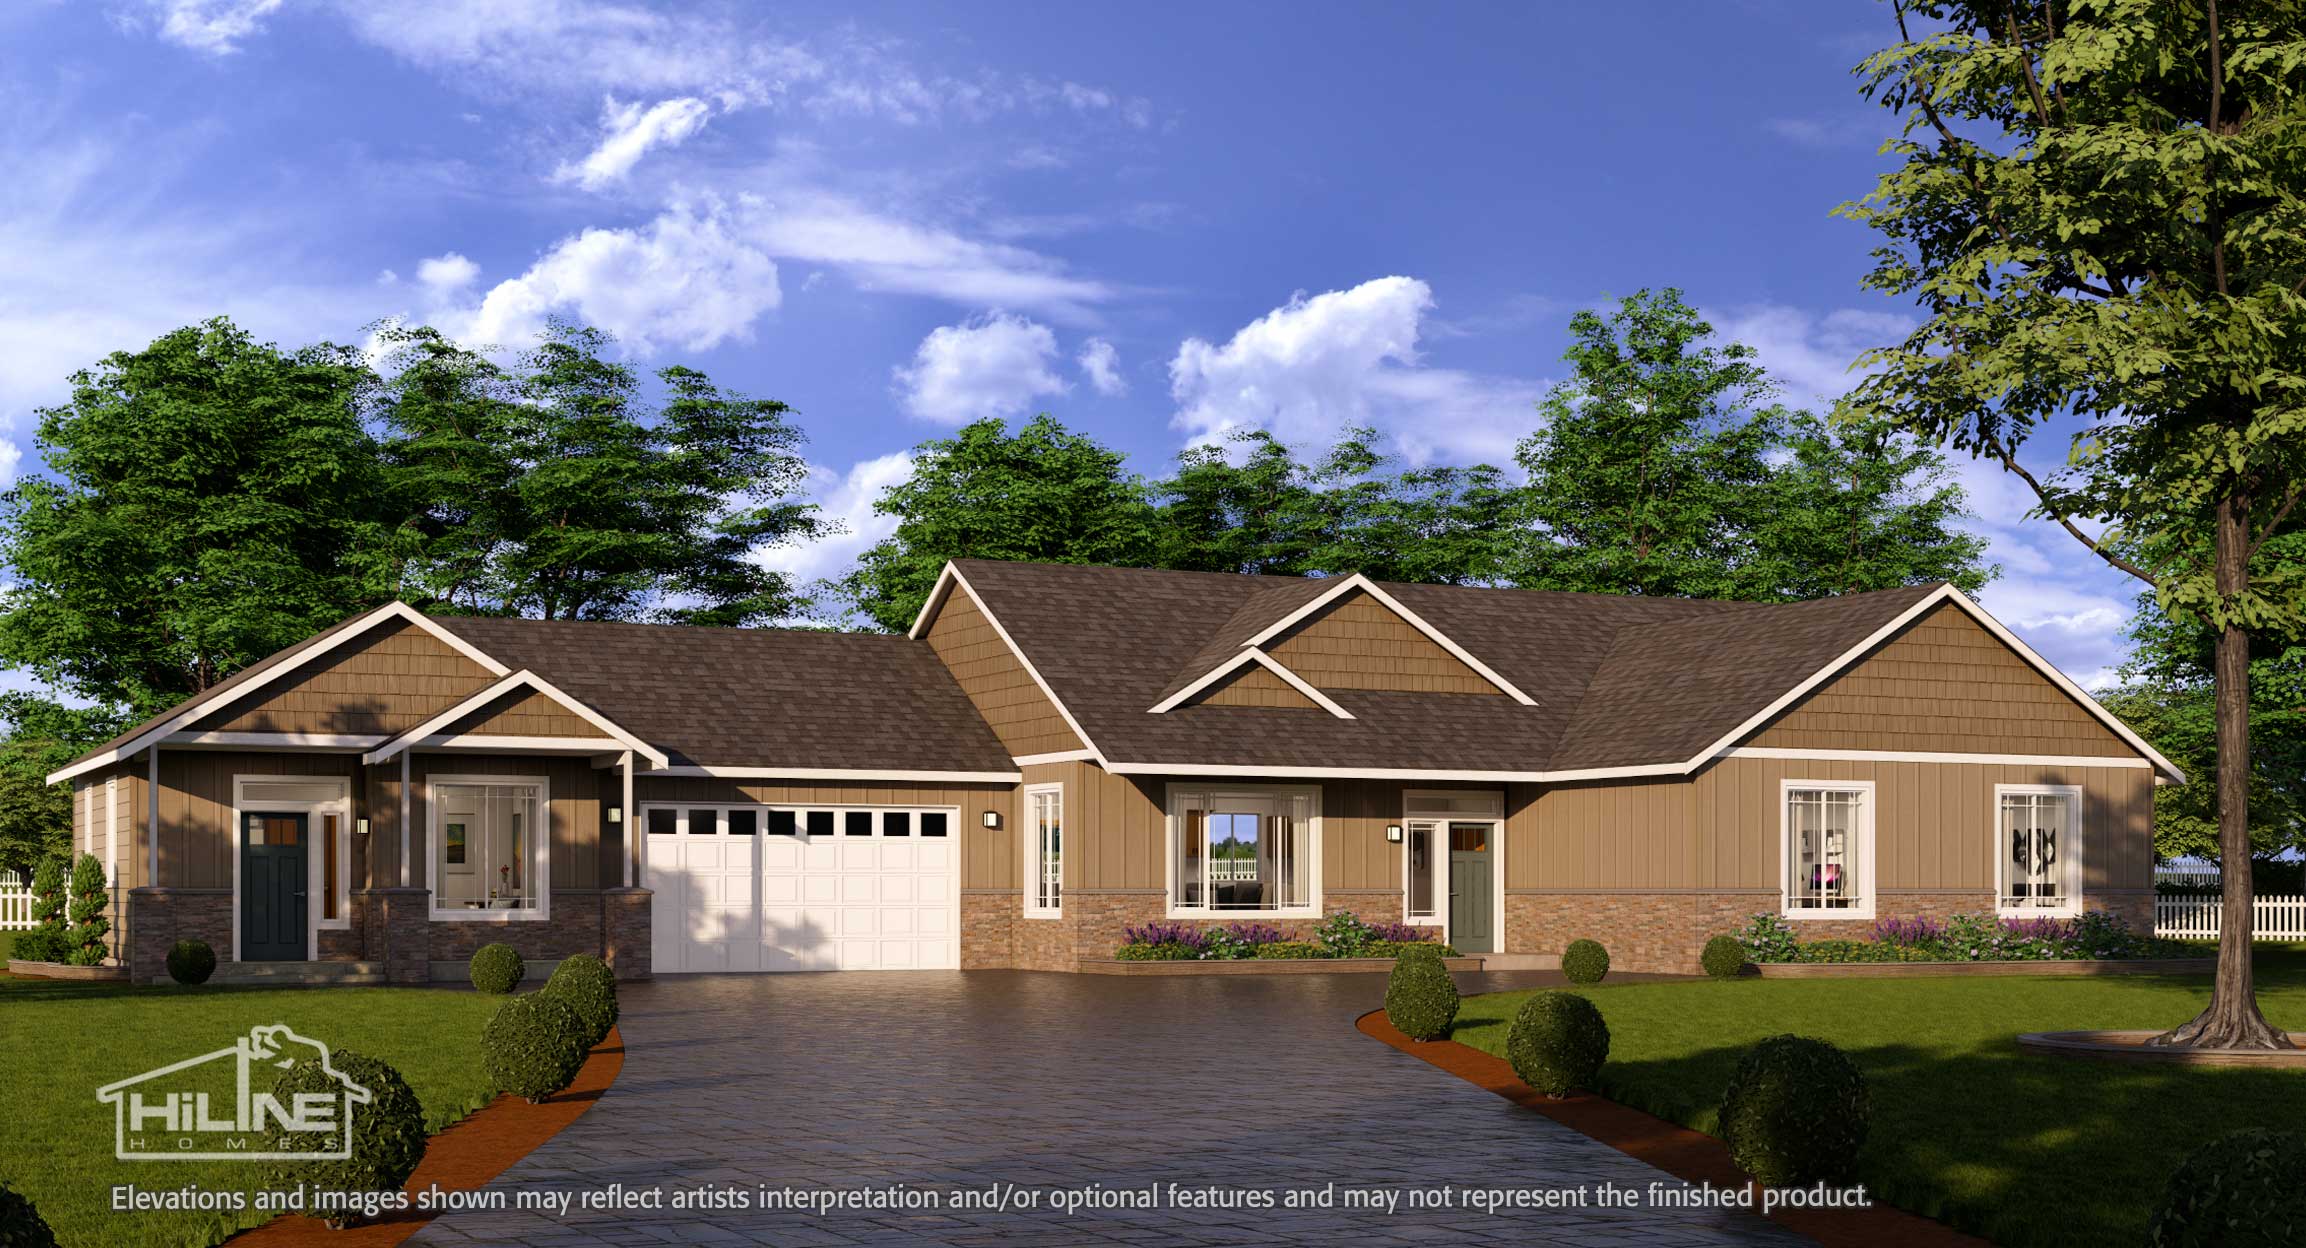 Image of HiLine Homes Plan 2112 with attached Plan 500A.